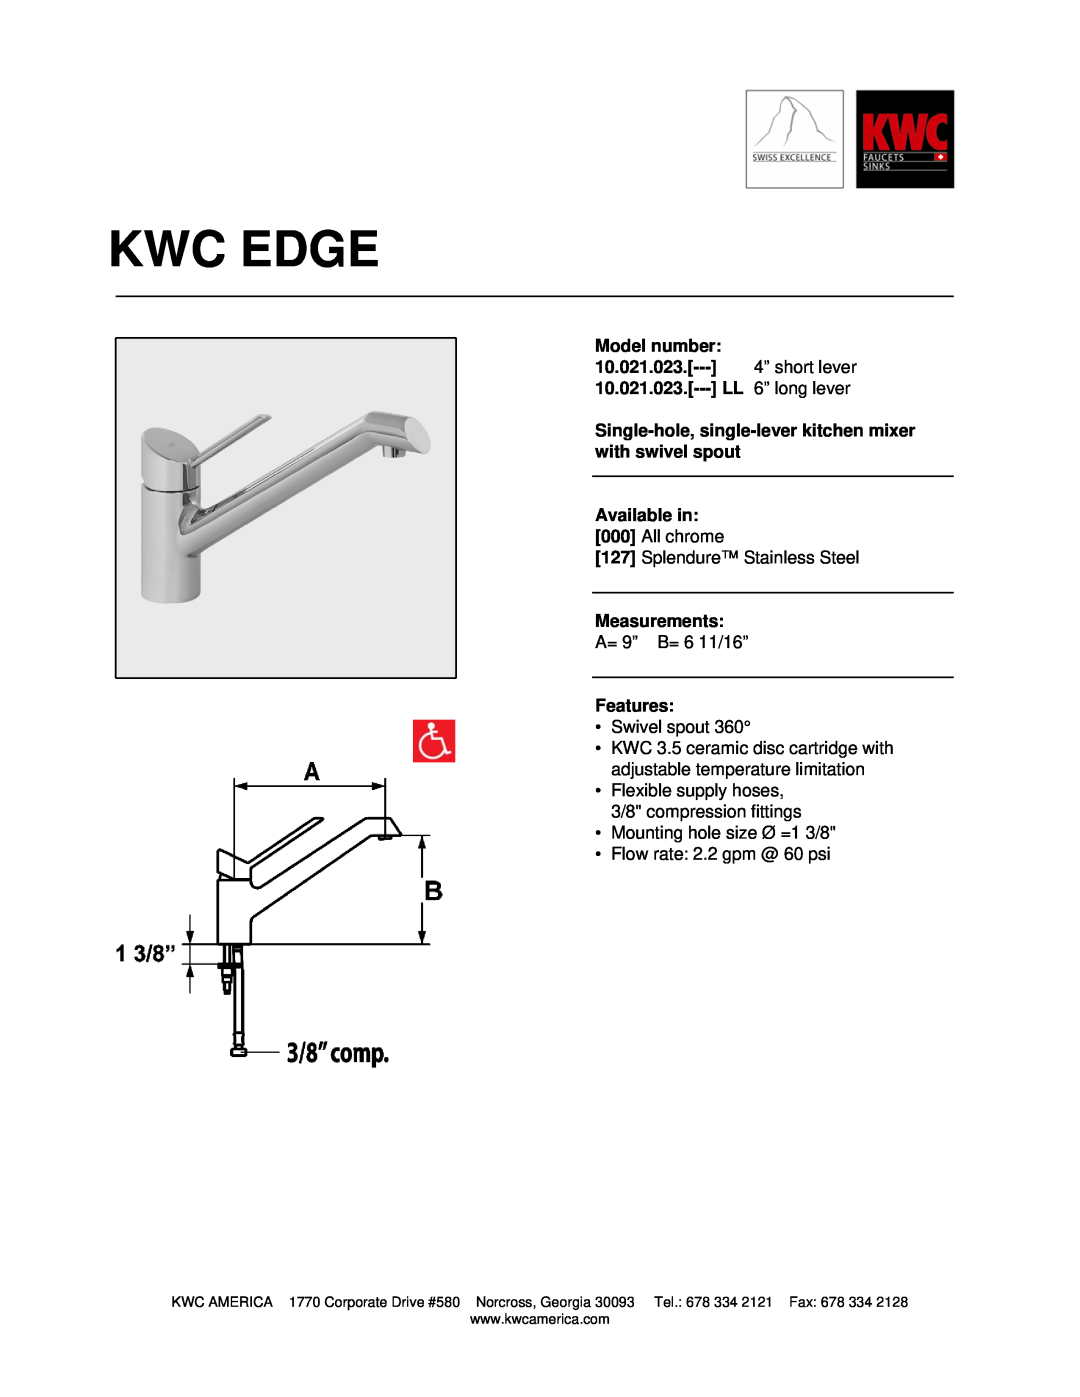 KWC 10.021.023 manual Kwc Edge, Model number, Available in, Measurements, Features 